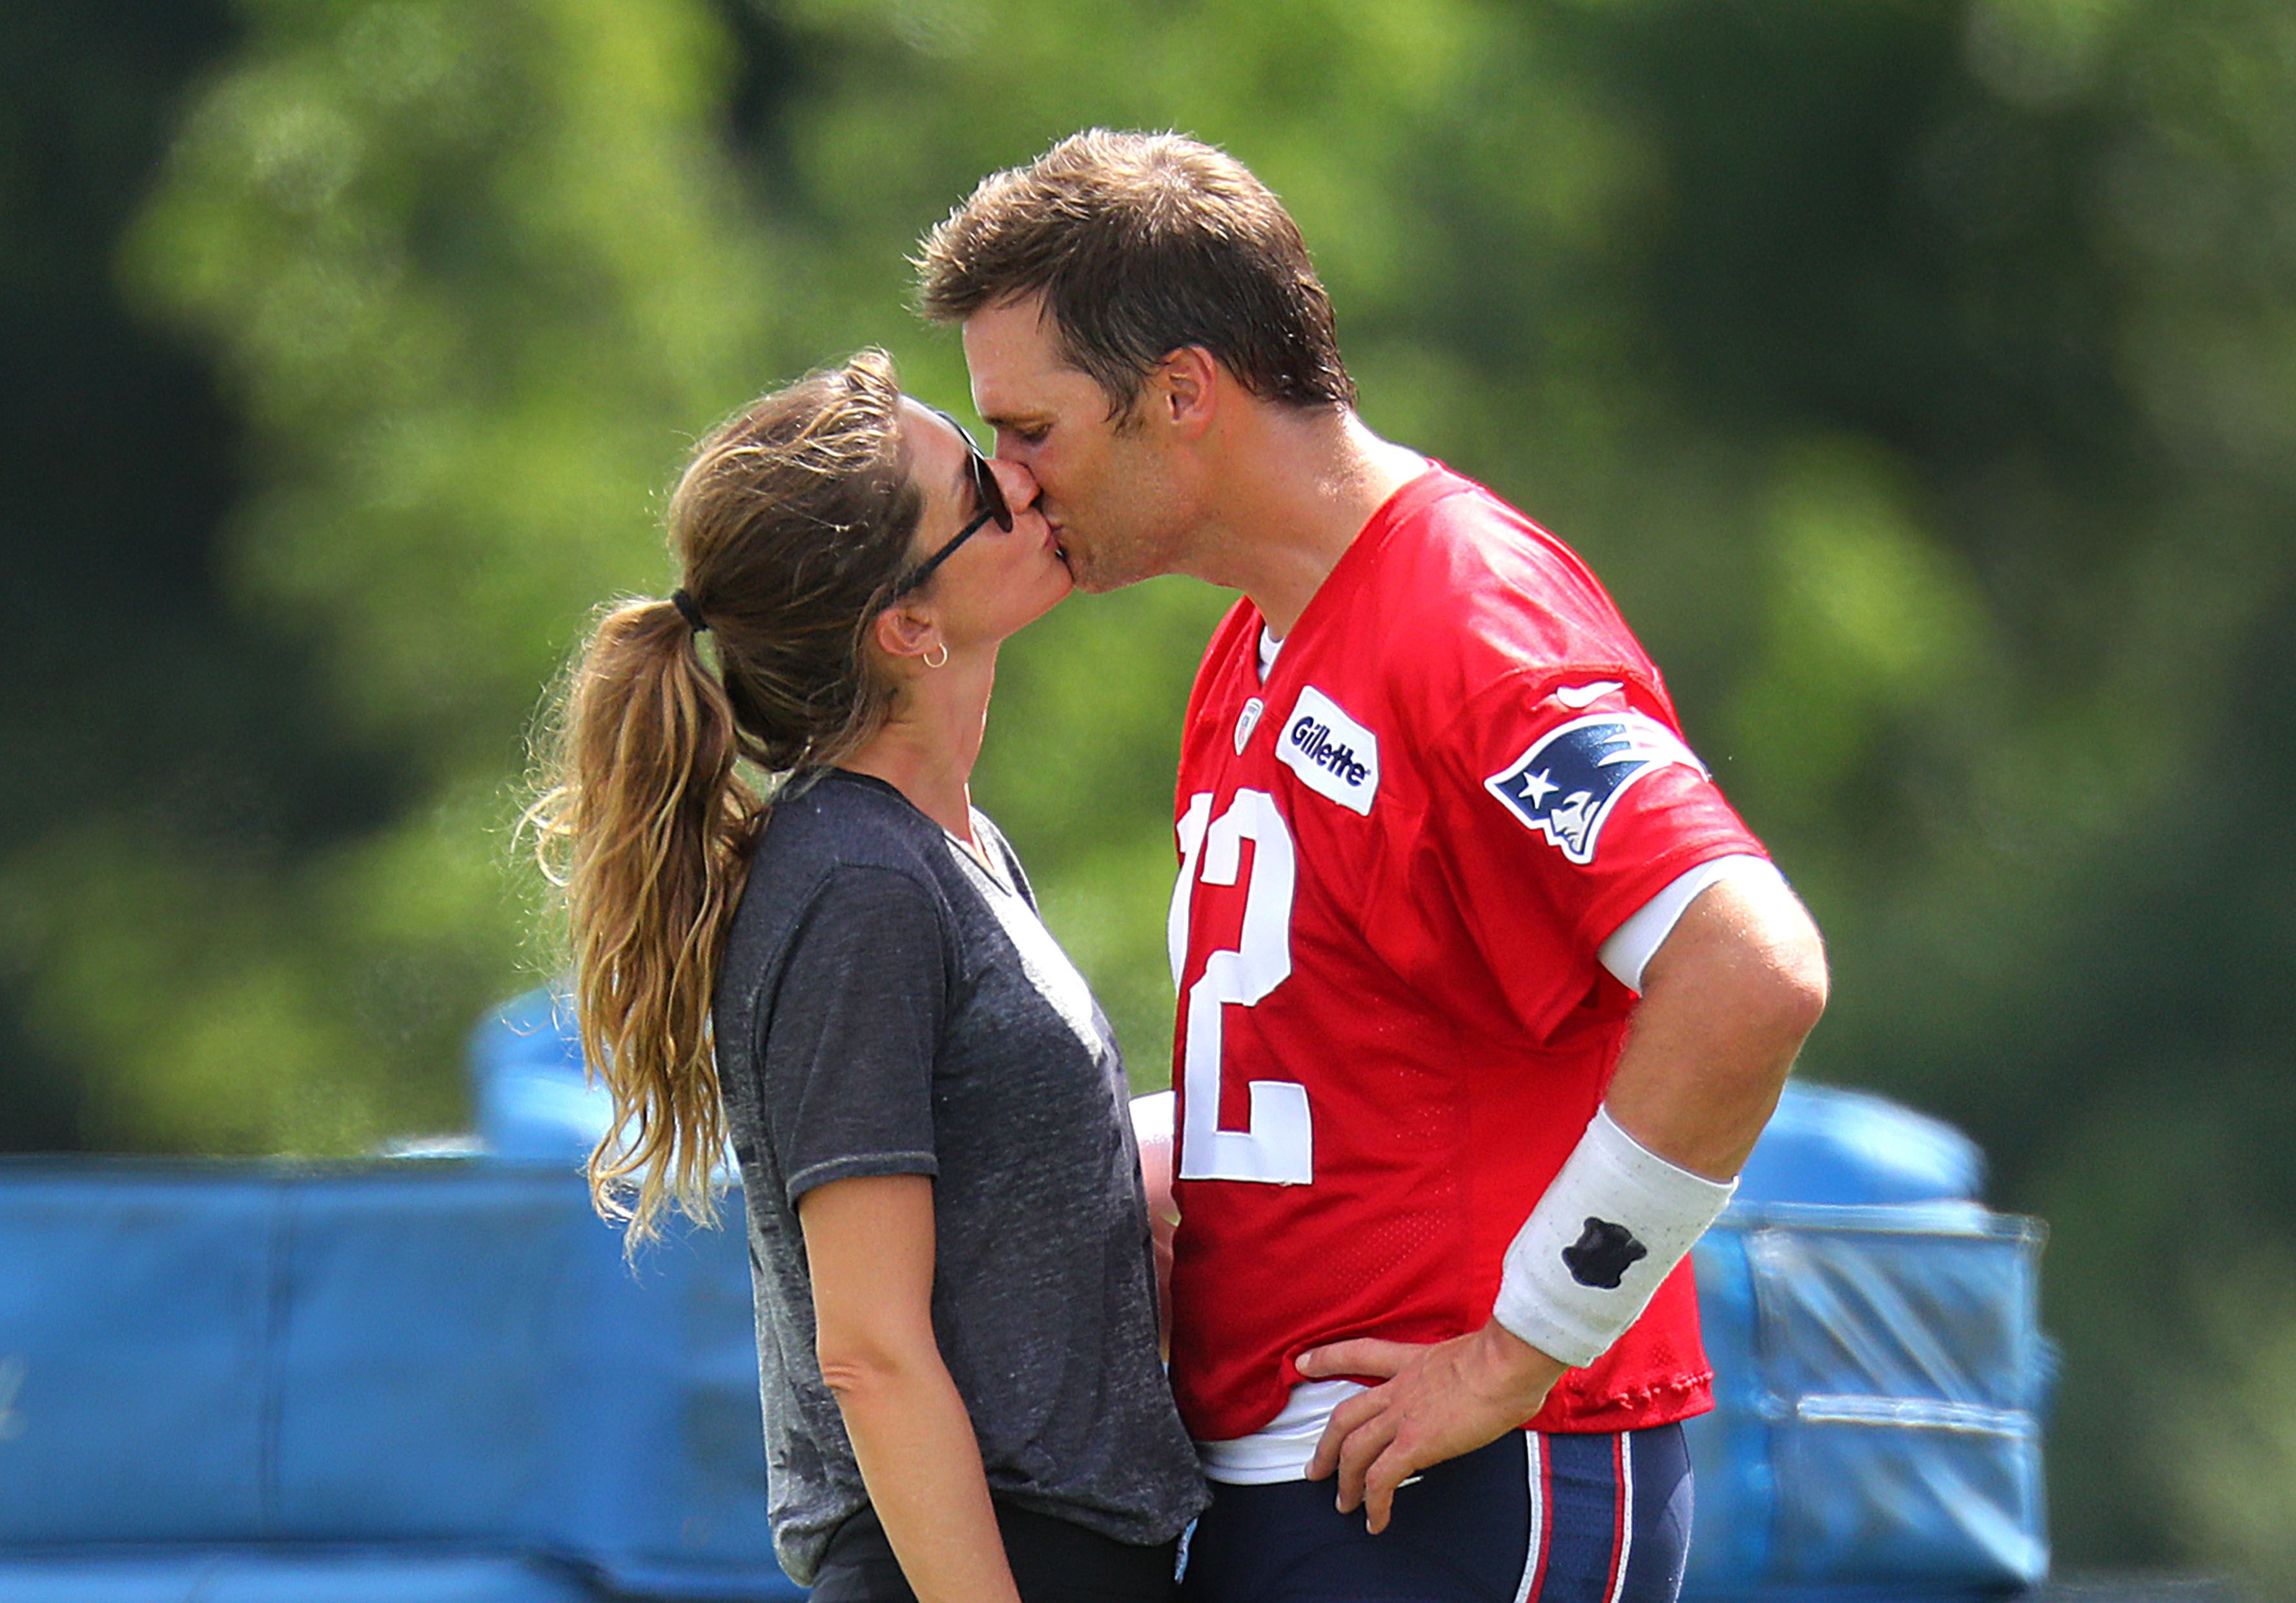 Tom Brady kisses his Gisele Bundchen following Patriots training camp at the Gillette Stadium practice facility in Foxborough, MA on Aug. 3, 2018. | Source: Getty Images